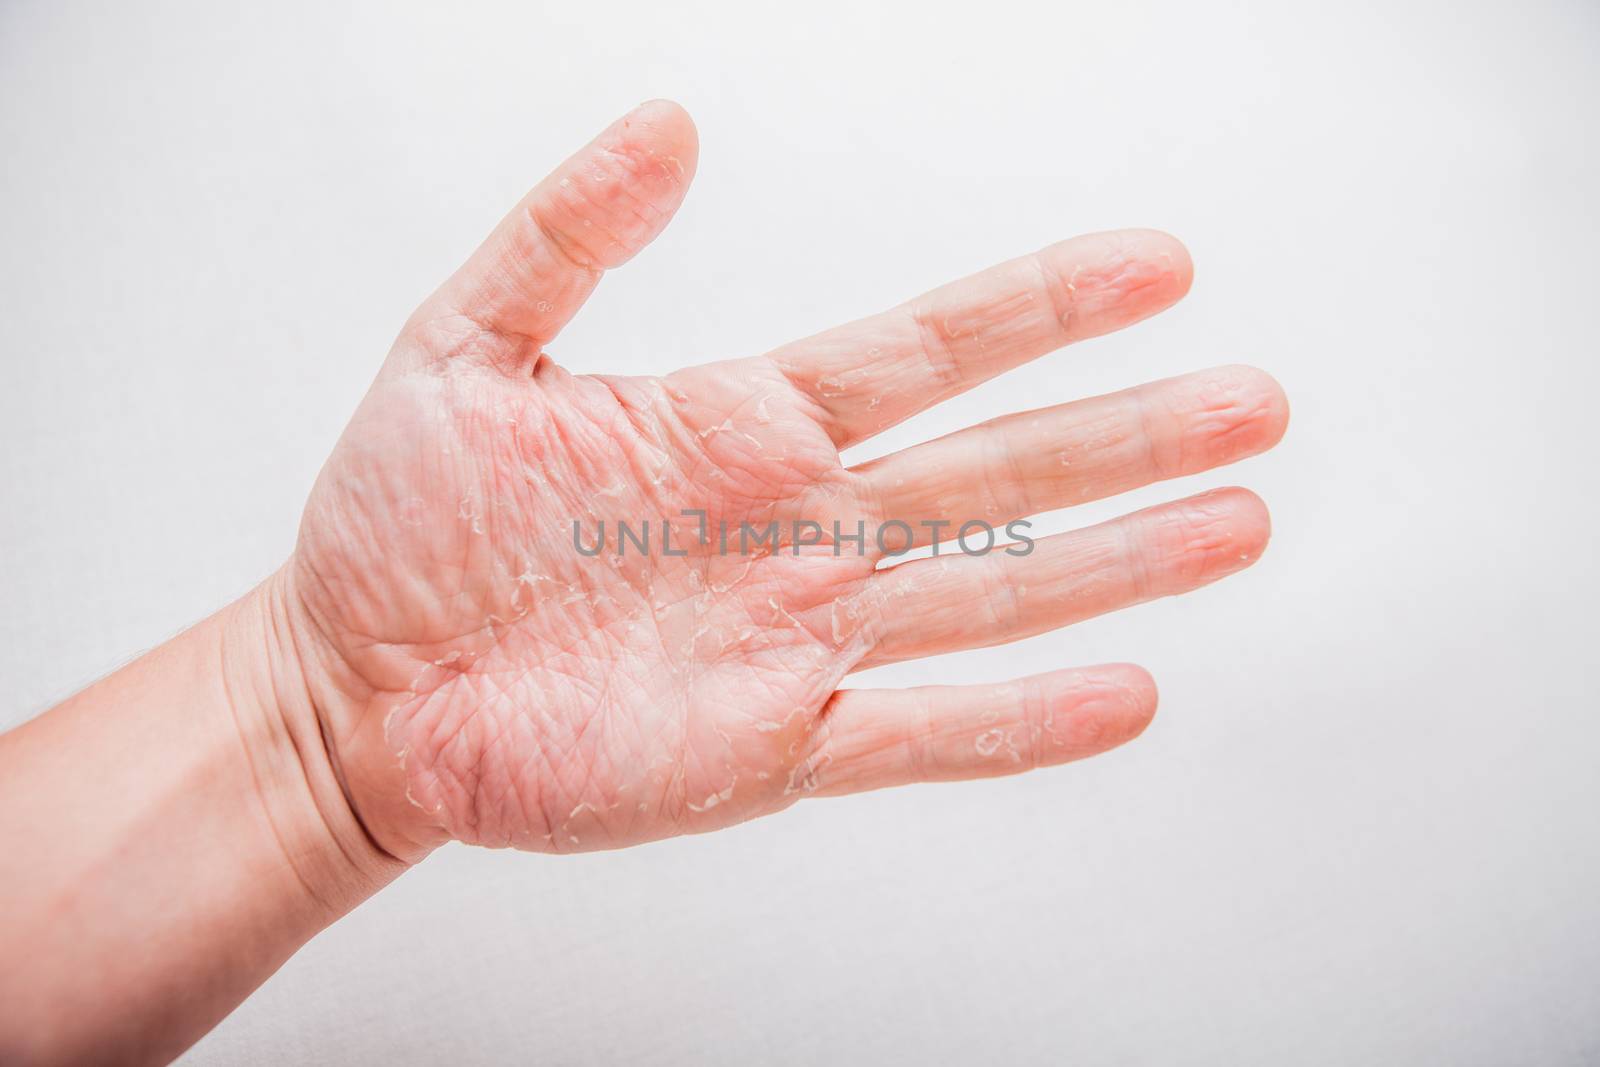 The problem with many people - eczema on hand. Isolated background.